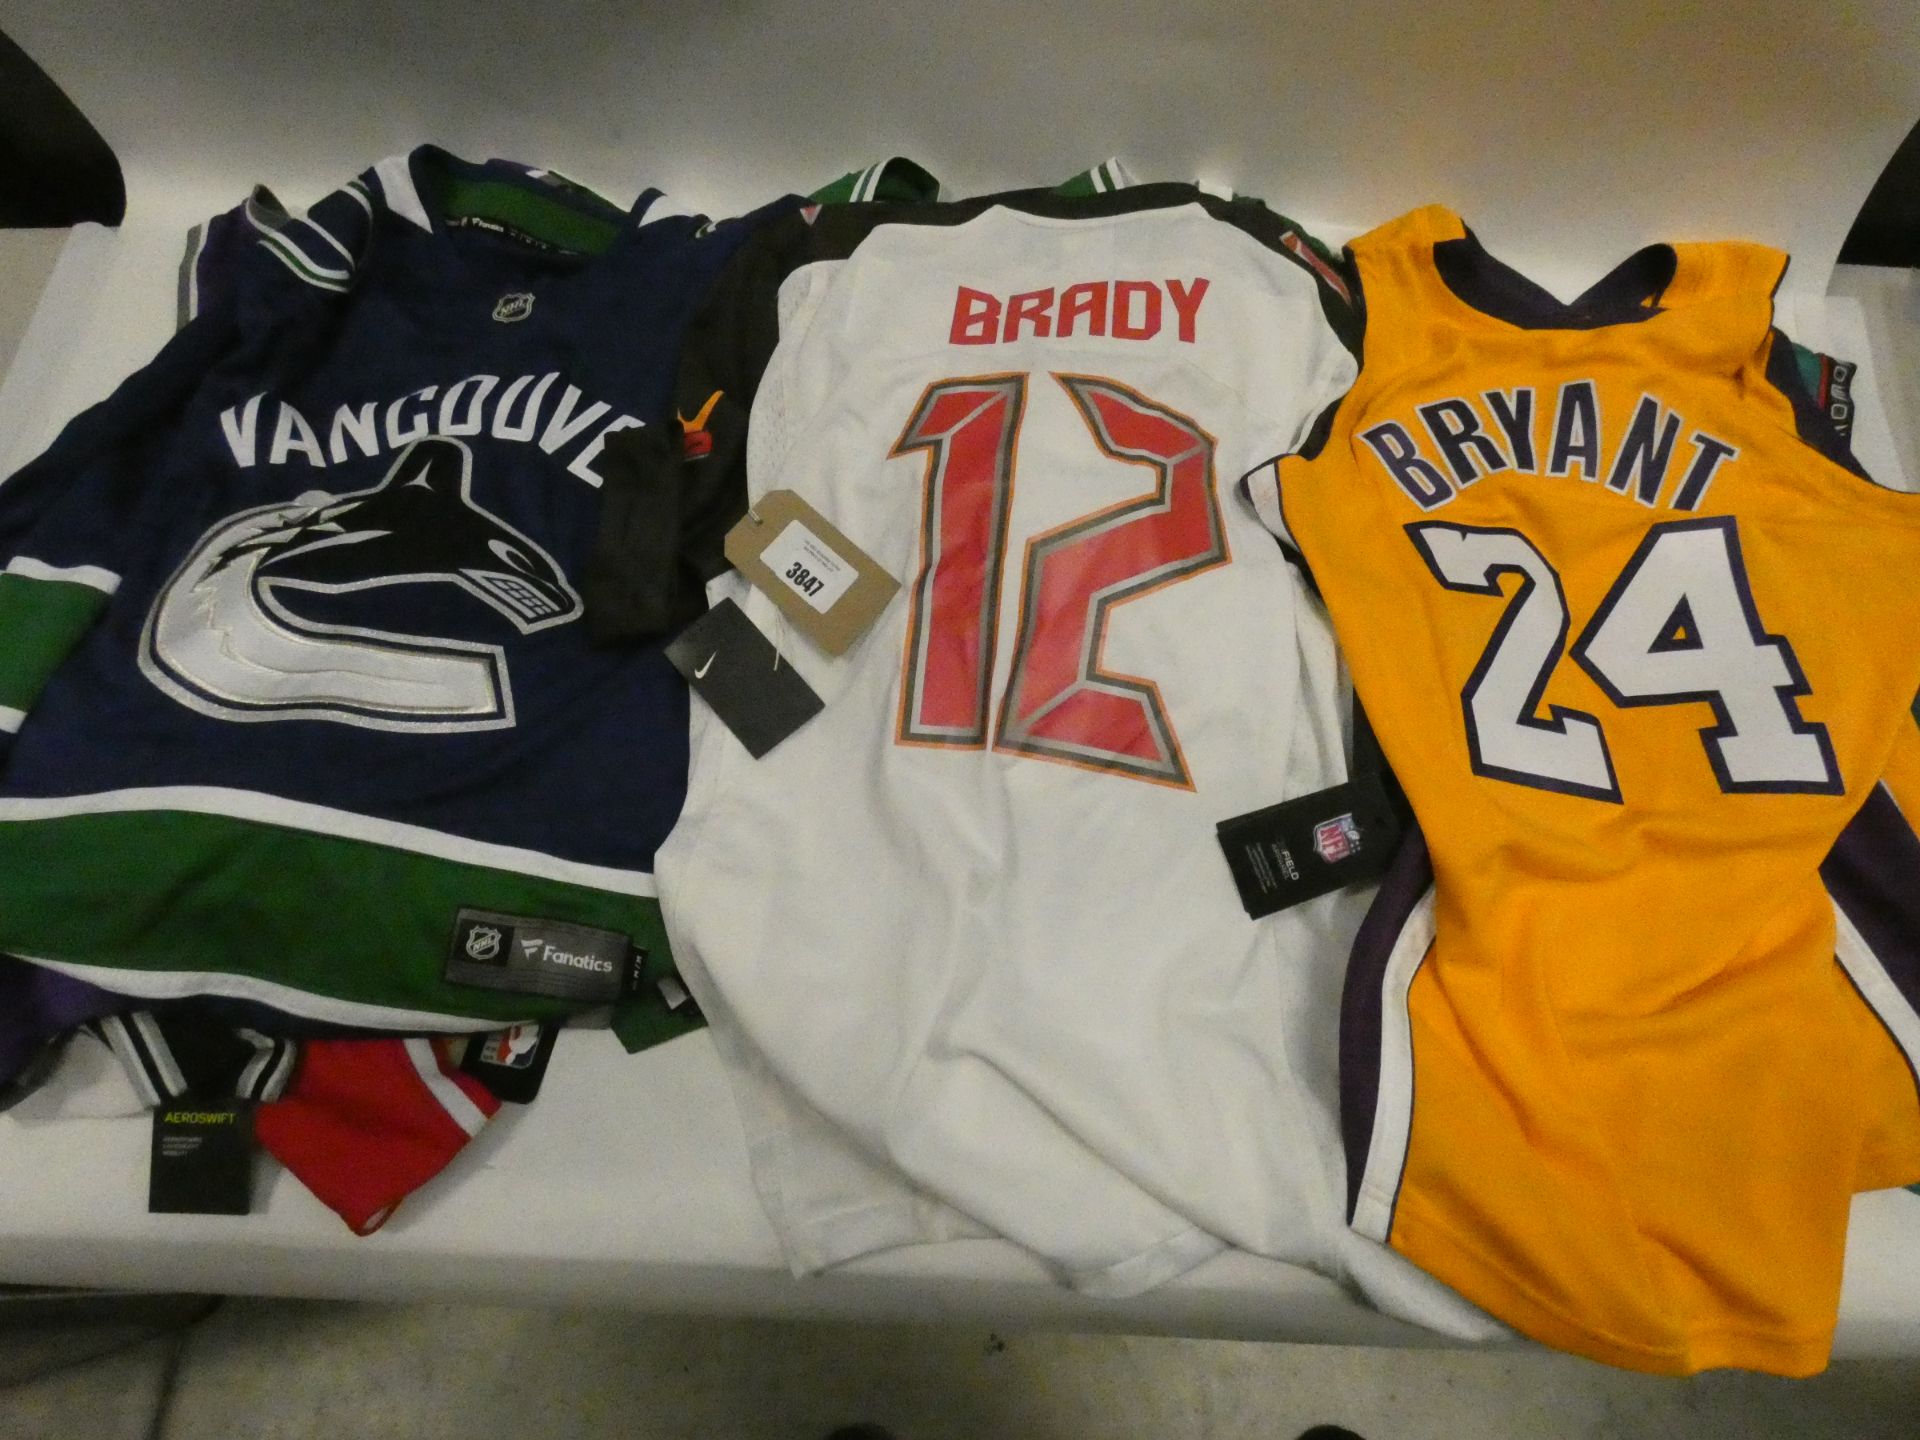 Large bag containing NBA, NHL and NFL jerseys in various sizes (some used)